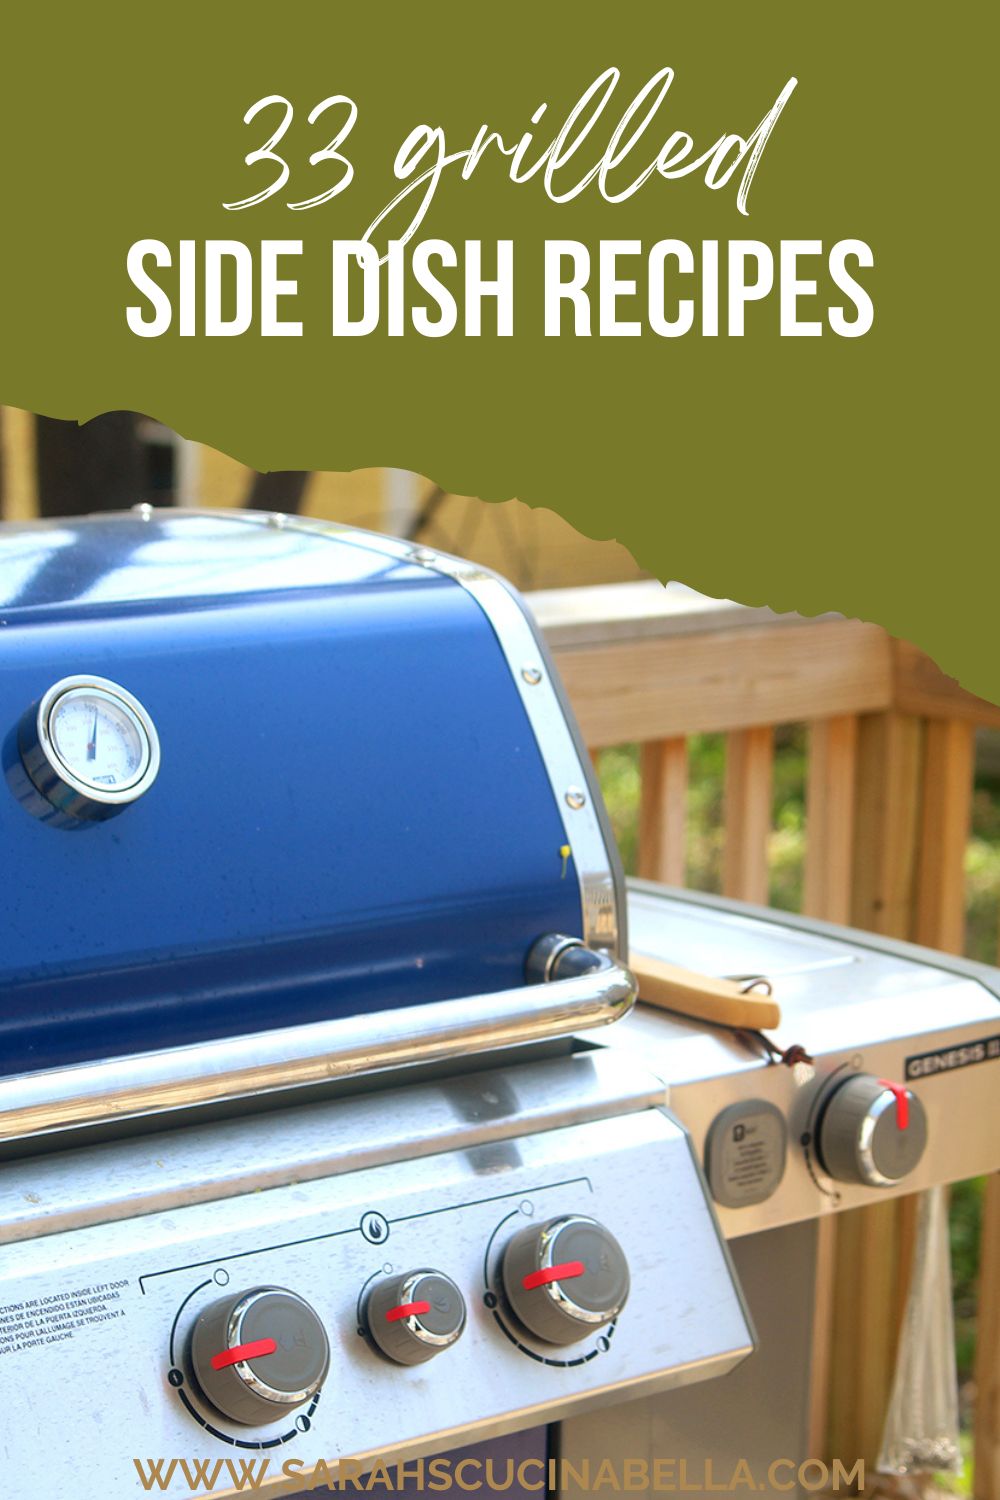 A blue and stainless steel grill is shown on a deck. The words "33 Grilled Side Dish Recipes" appear on the image.